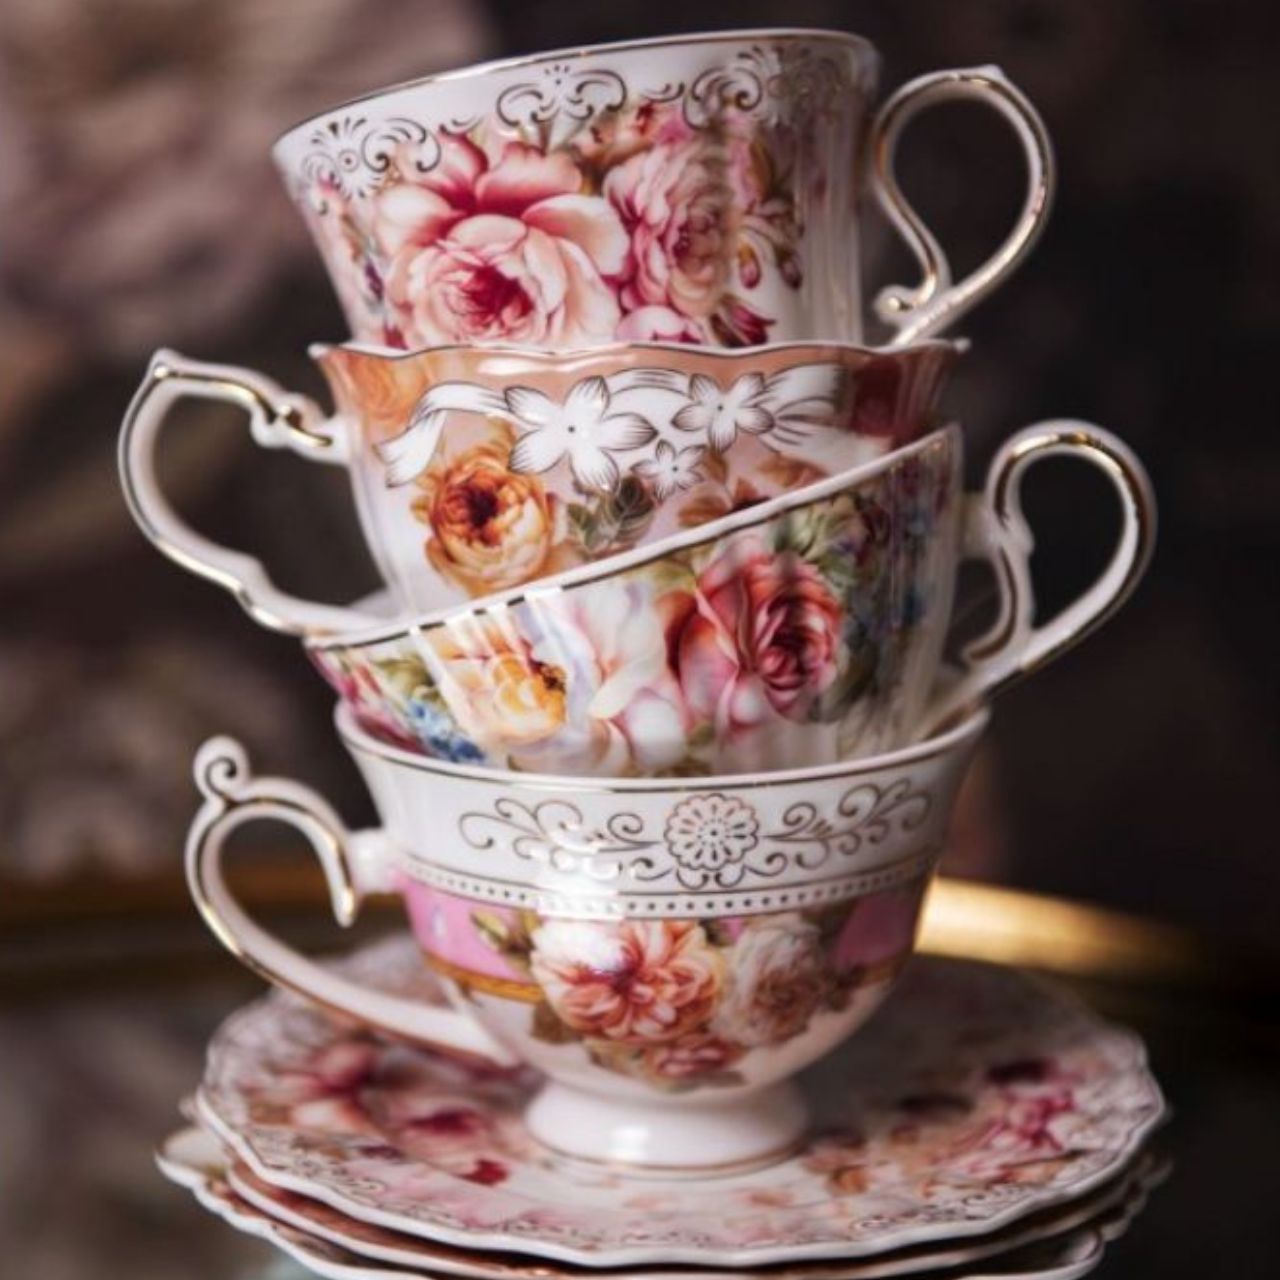 An elegant high-tea or simply a tea lover? Your tea will taste even better with our cups and saucers! Our cups come in the most unique designs; covered with antique, vintage, or cute prints. But we also have plain cups and saucers with a stylish design for those who don’t like prints that much. Great for a cup of cappuccino!